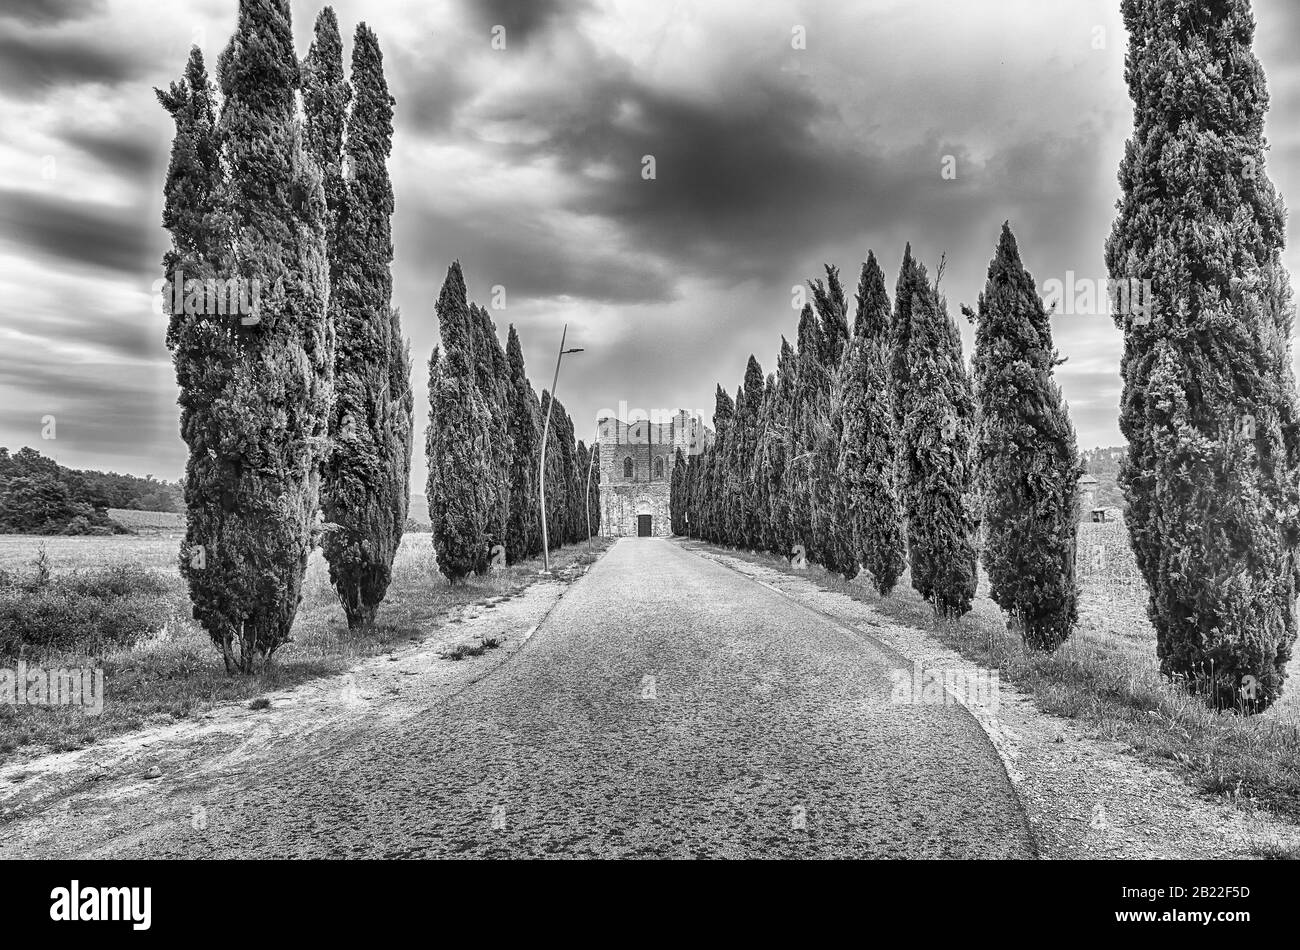 CHIUSDINO, ITALY - JUNE 22: Scenic road dotted with cypress trees, that leads to the iconic Abbey of San Galgano, in the town of Chiusdino, in the pro Stock Photo